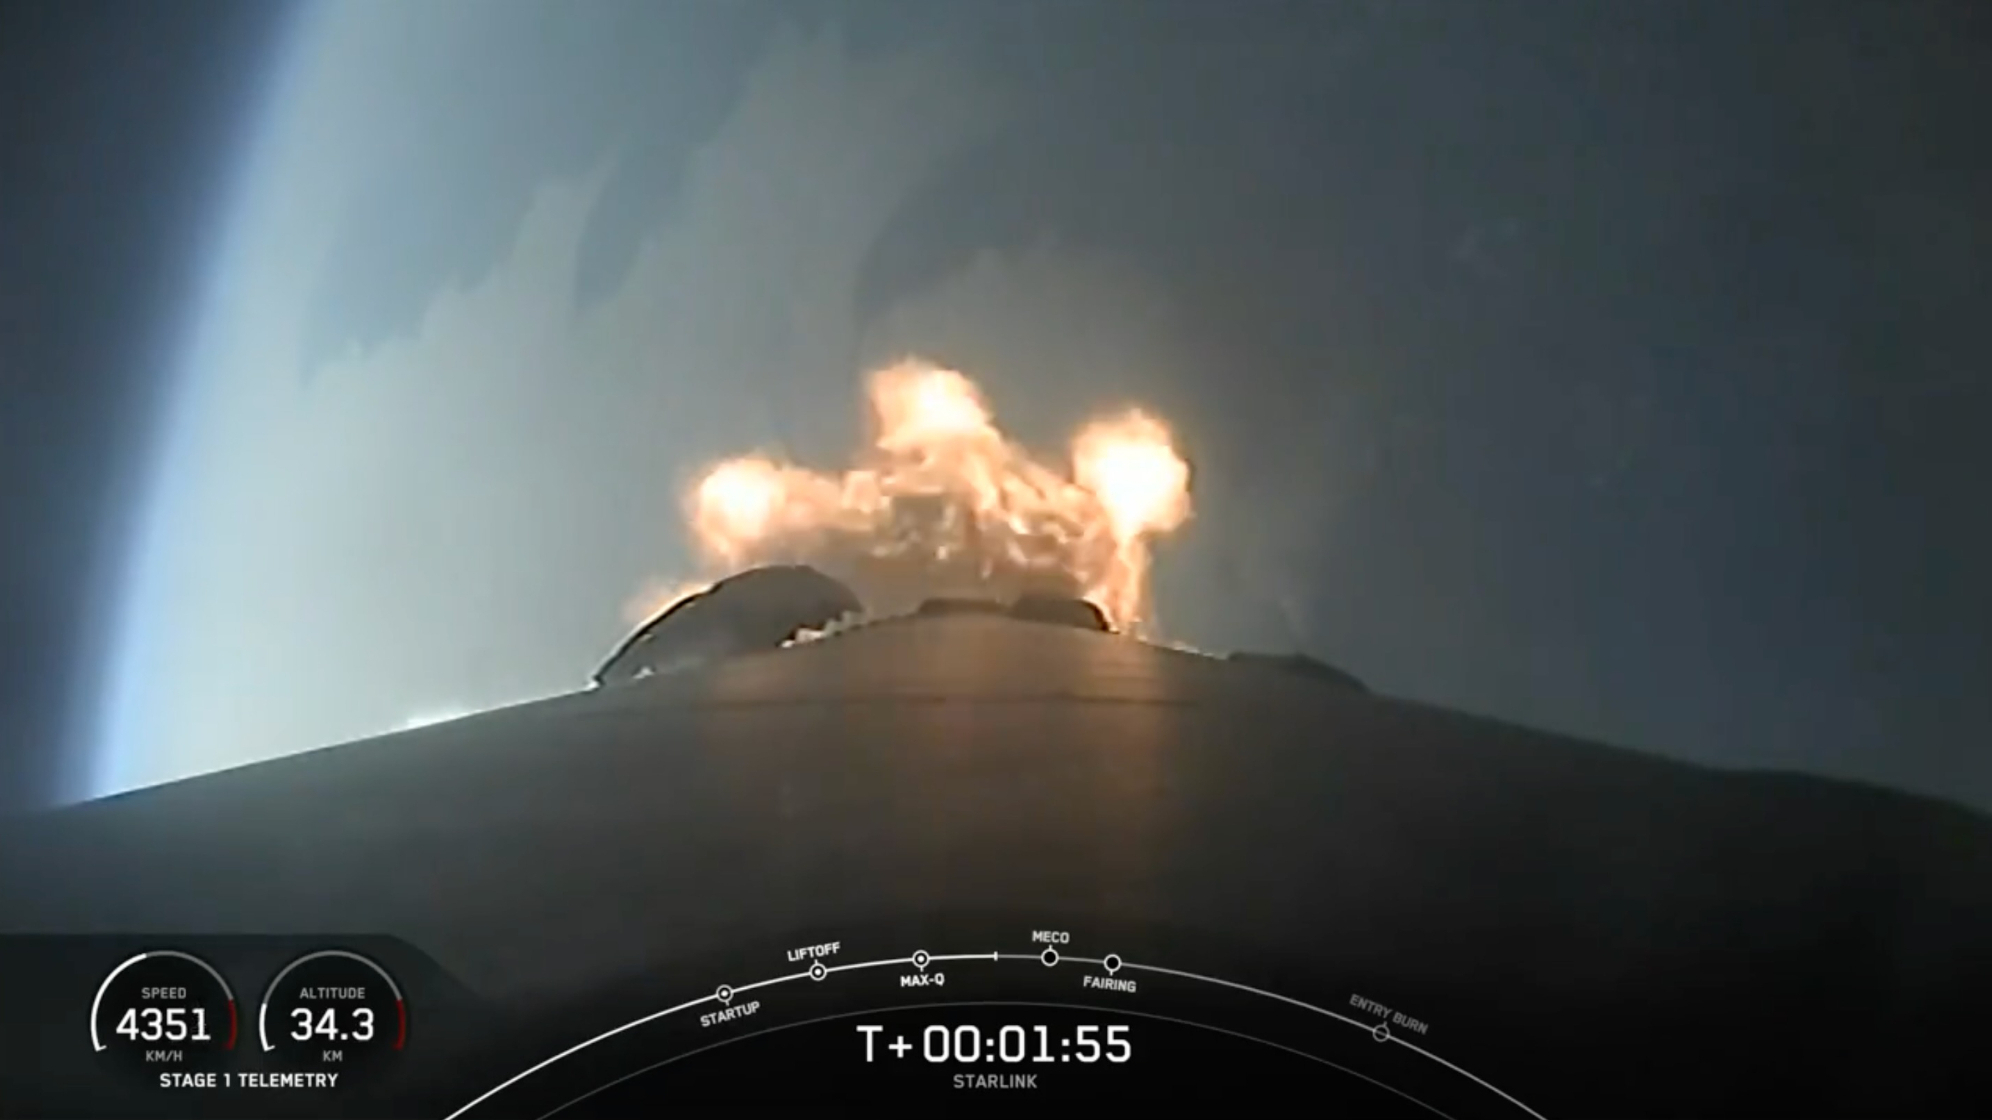  SpaceX Falcon 9 rocket failure forces NASA to evaluate astronaut launch schedule for ISS 